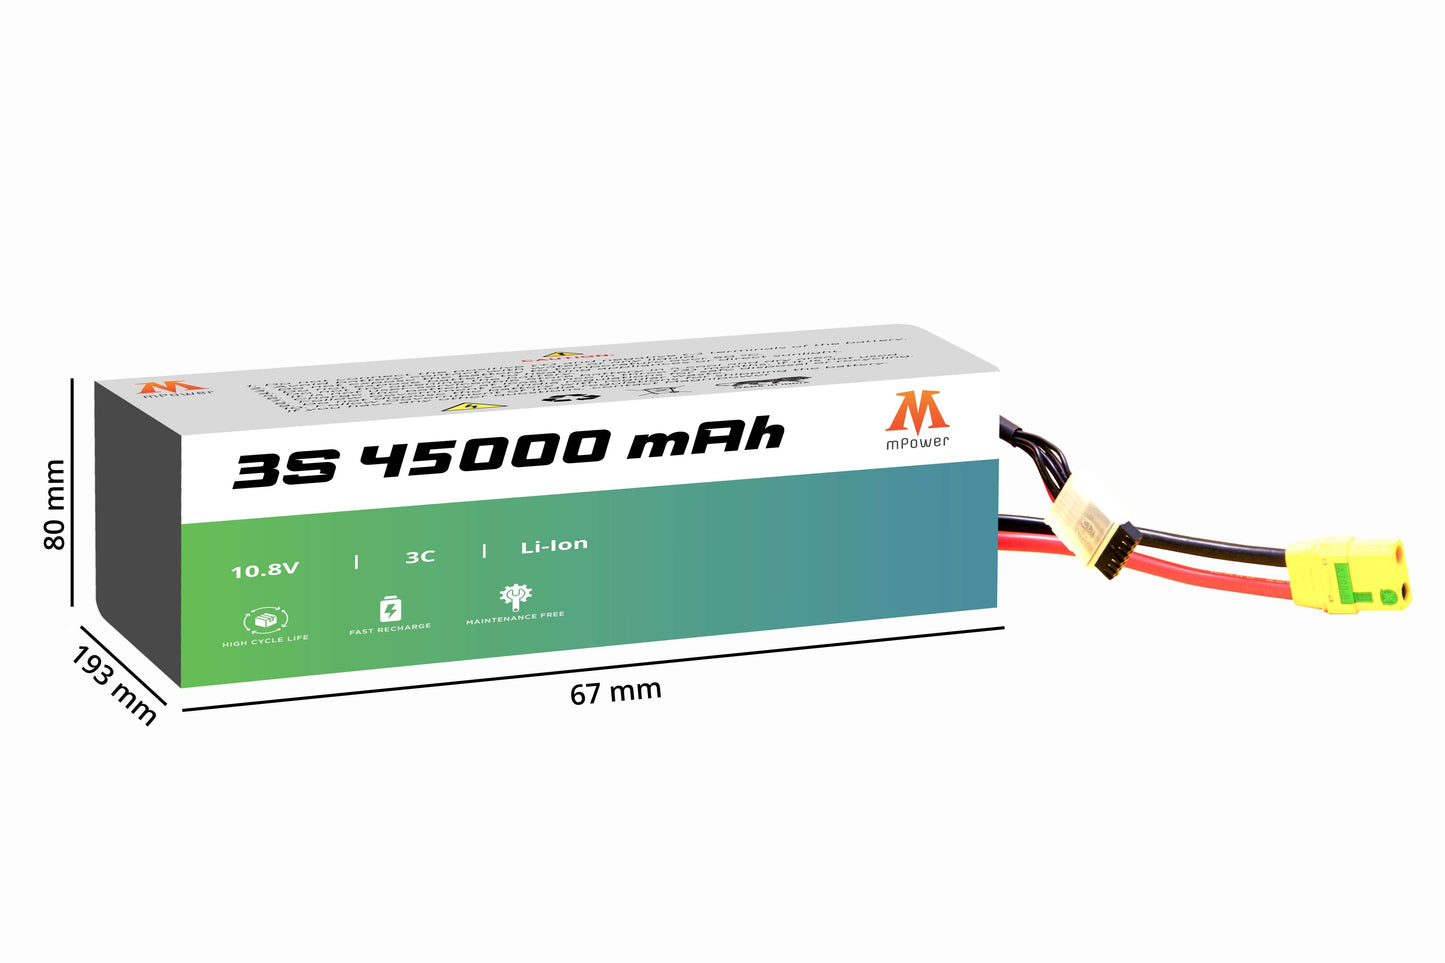 mPower 3S 45000mAh Lithium-Ion Battery for Survey Drones